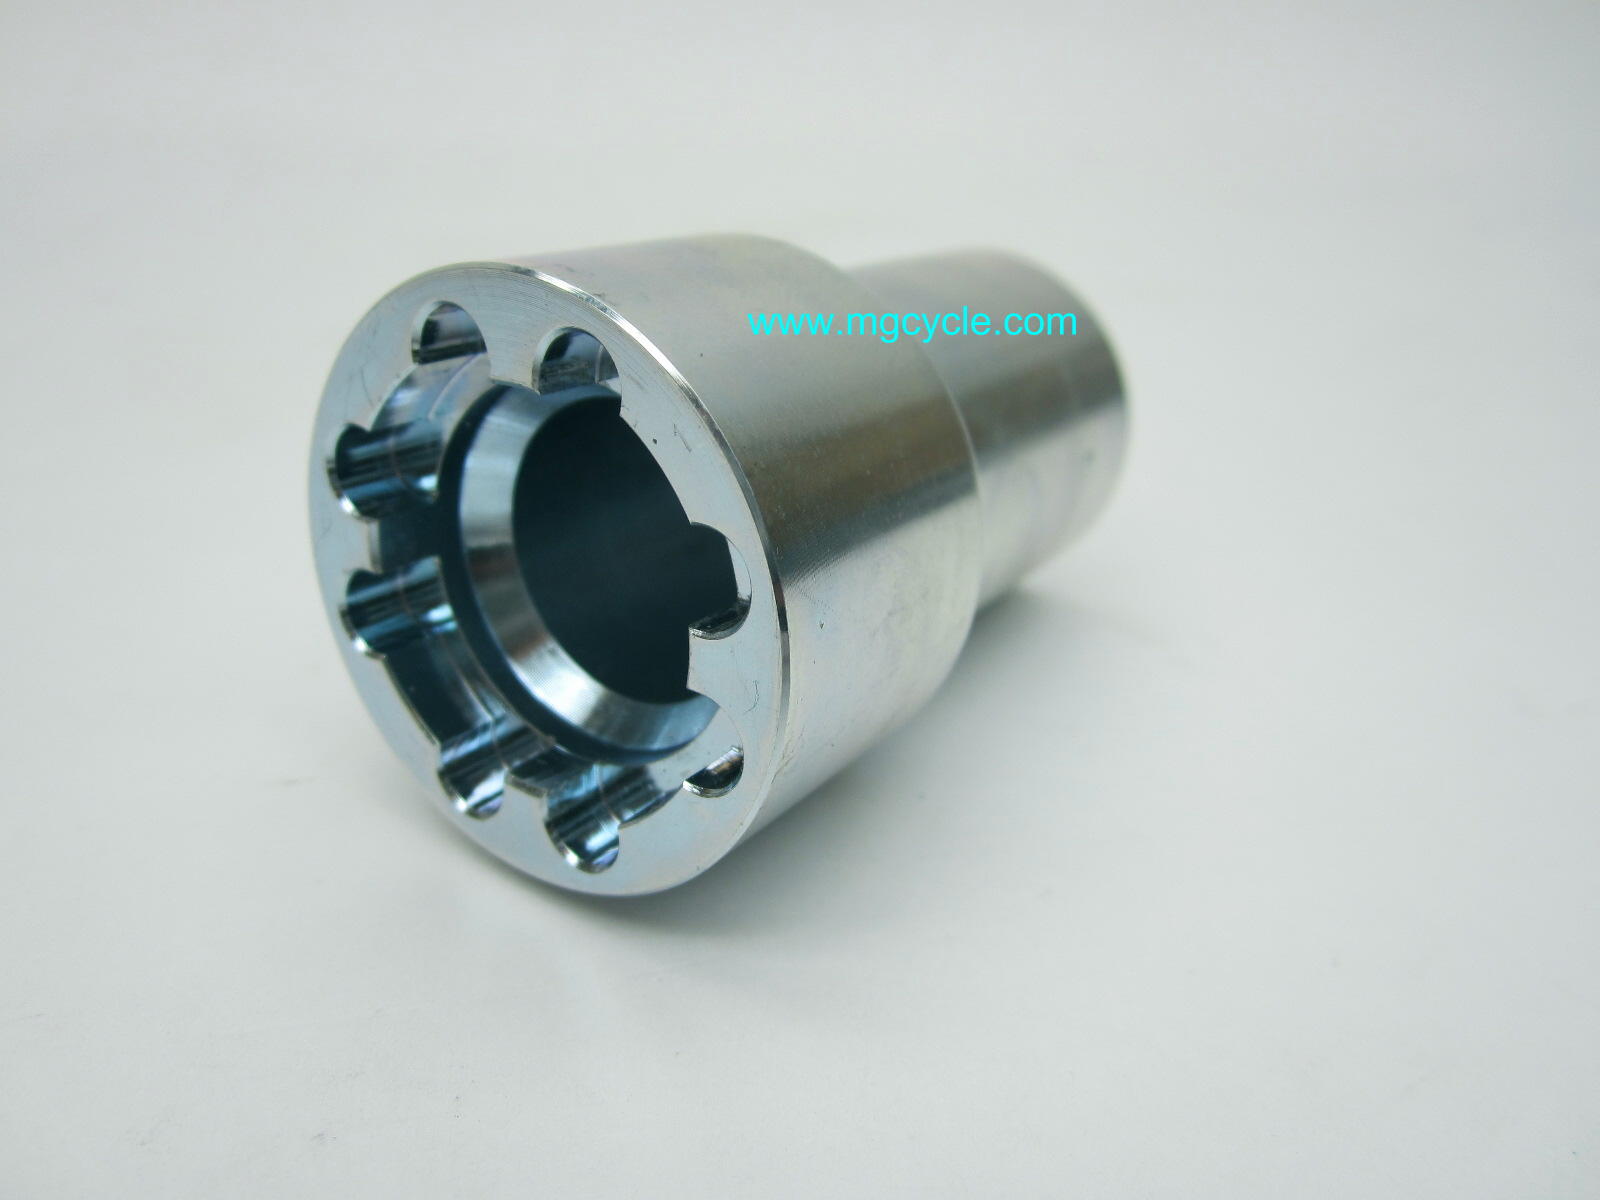 Axle nut tool for 1990s-2001 Guzzi models with ring nuts